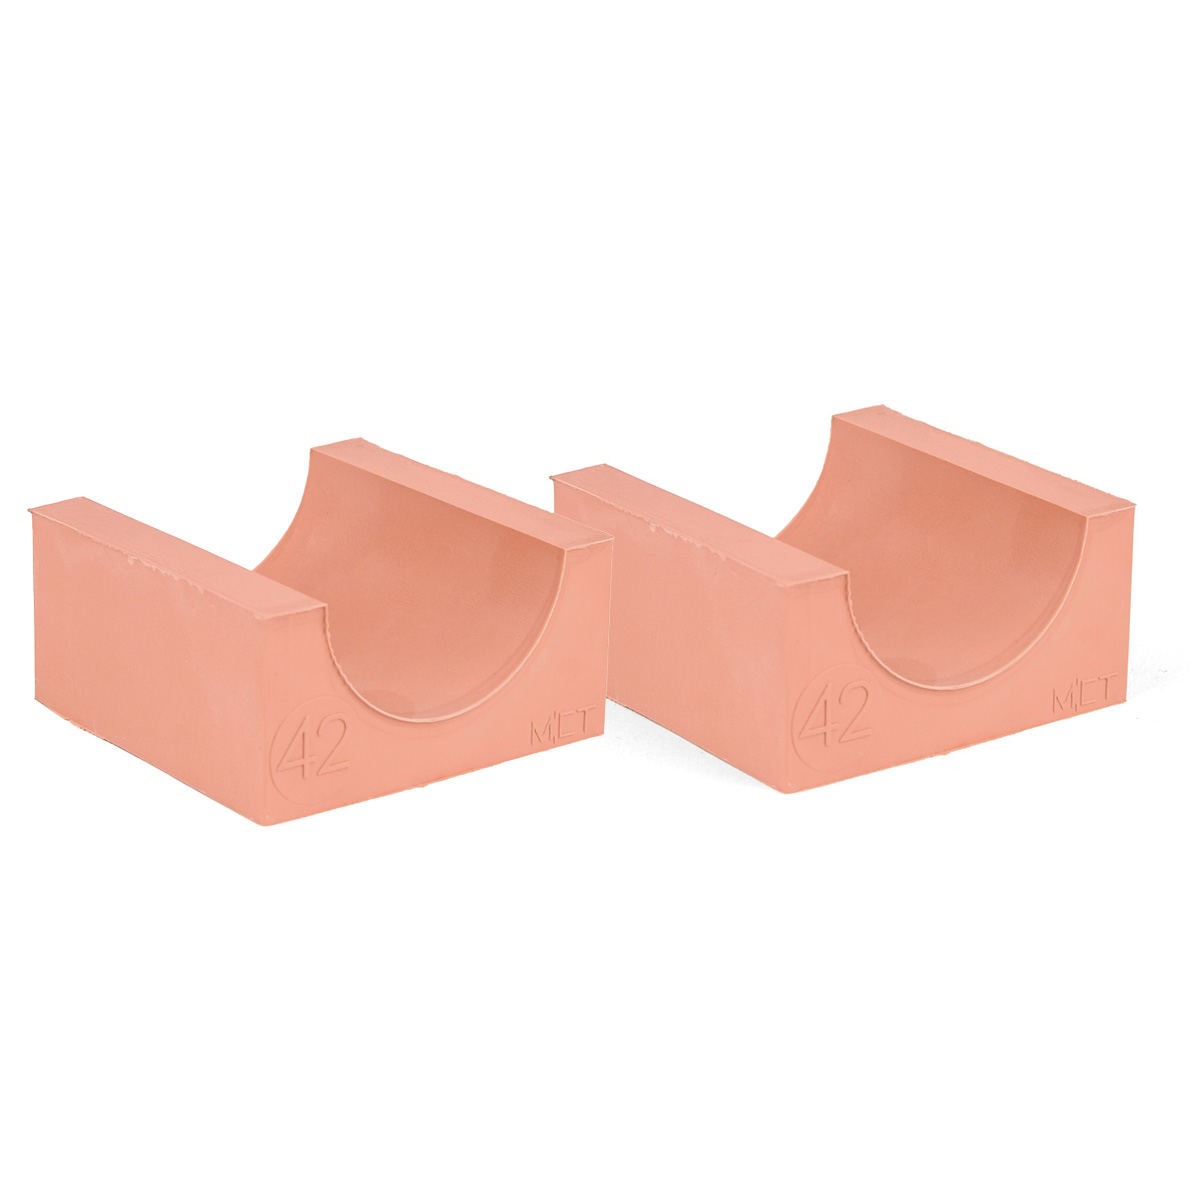 60-42*2 Set of 2 half insert block lycron, 60-42 for cable/pipe diam. 41.5-43.5mm